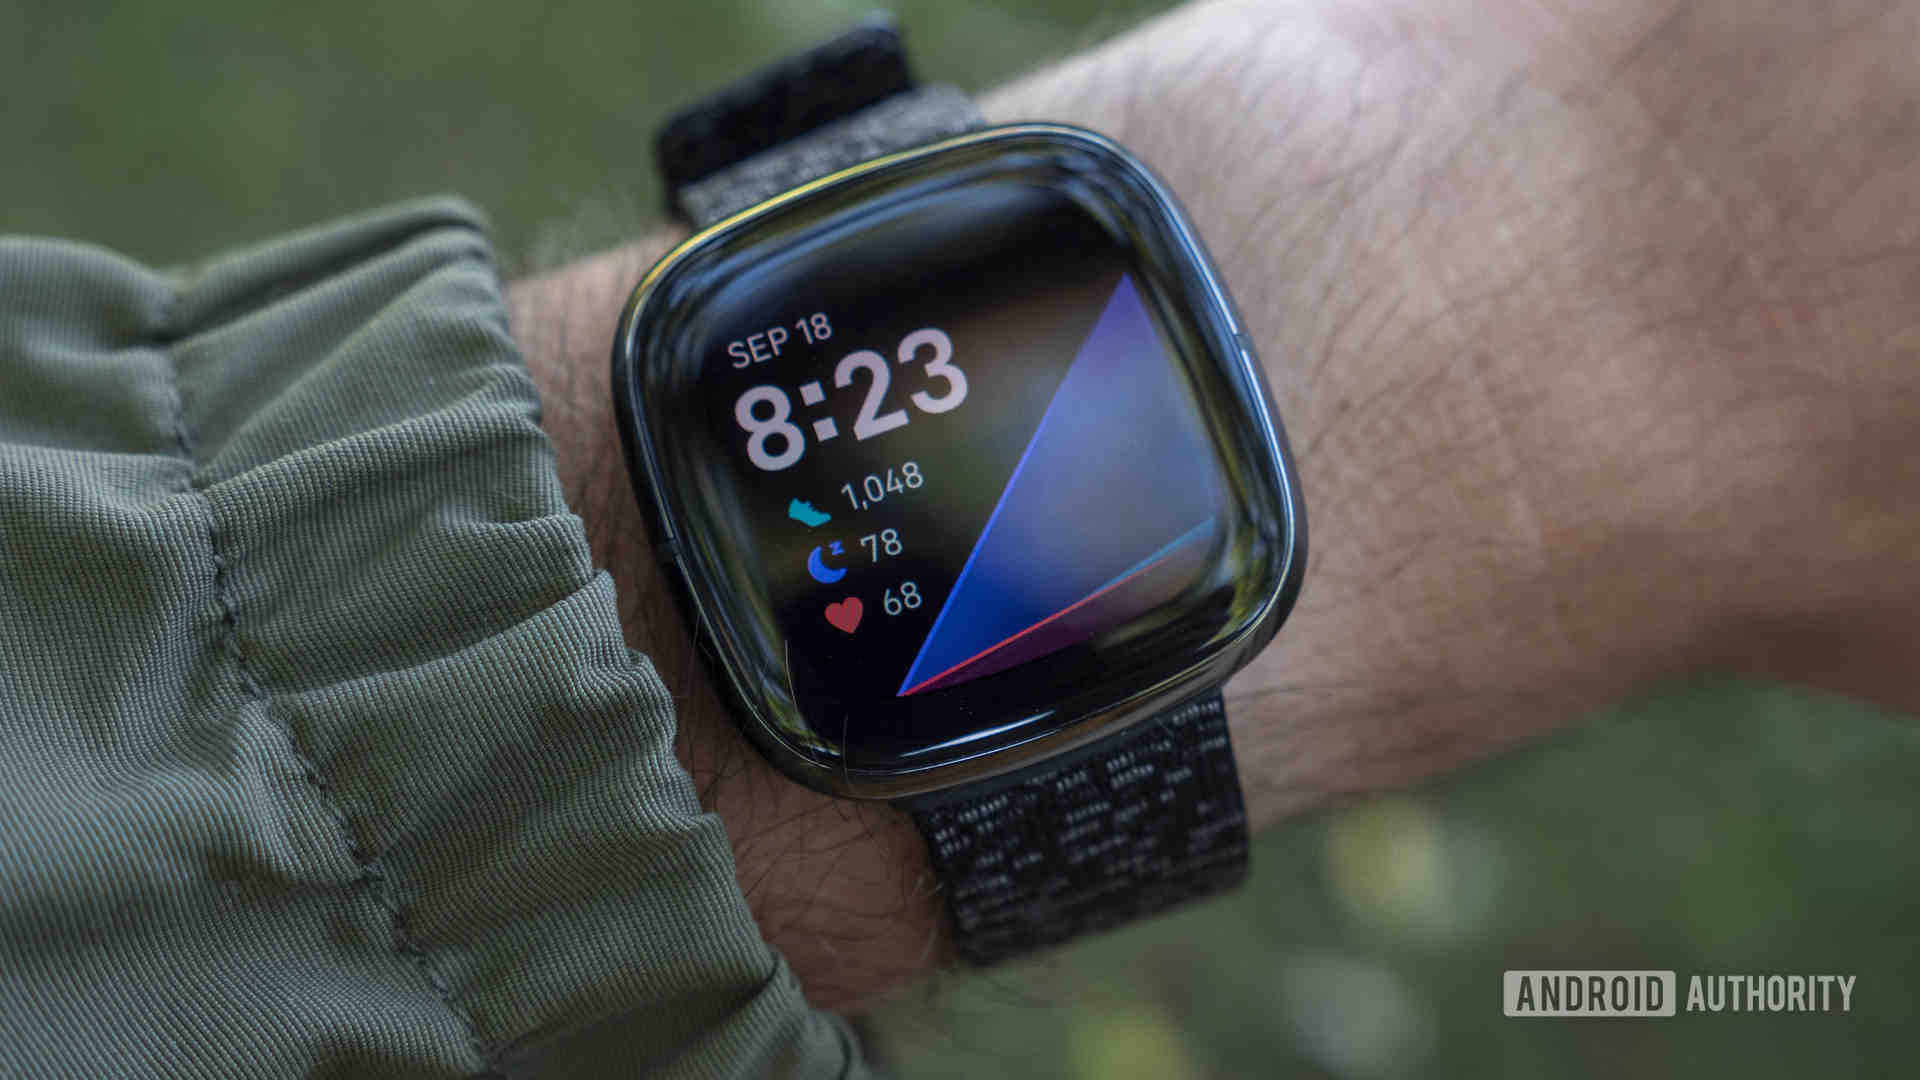 What is so good about Garmin?